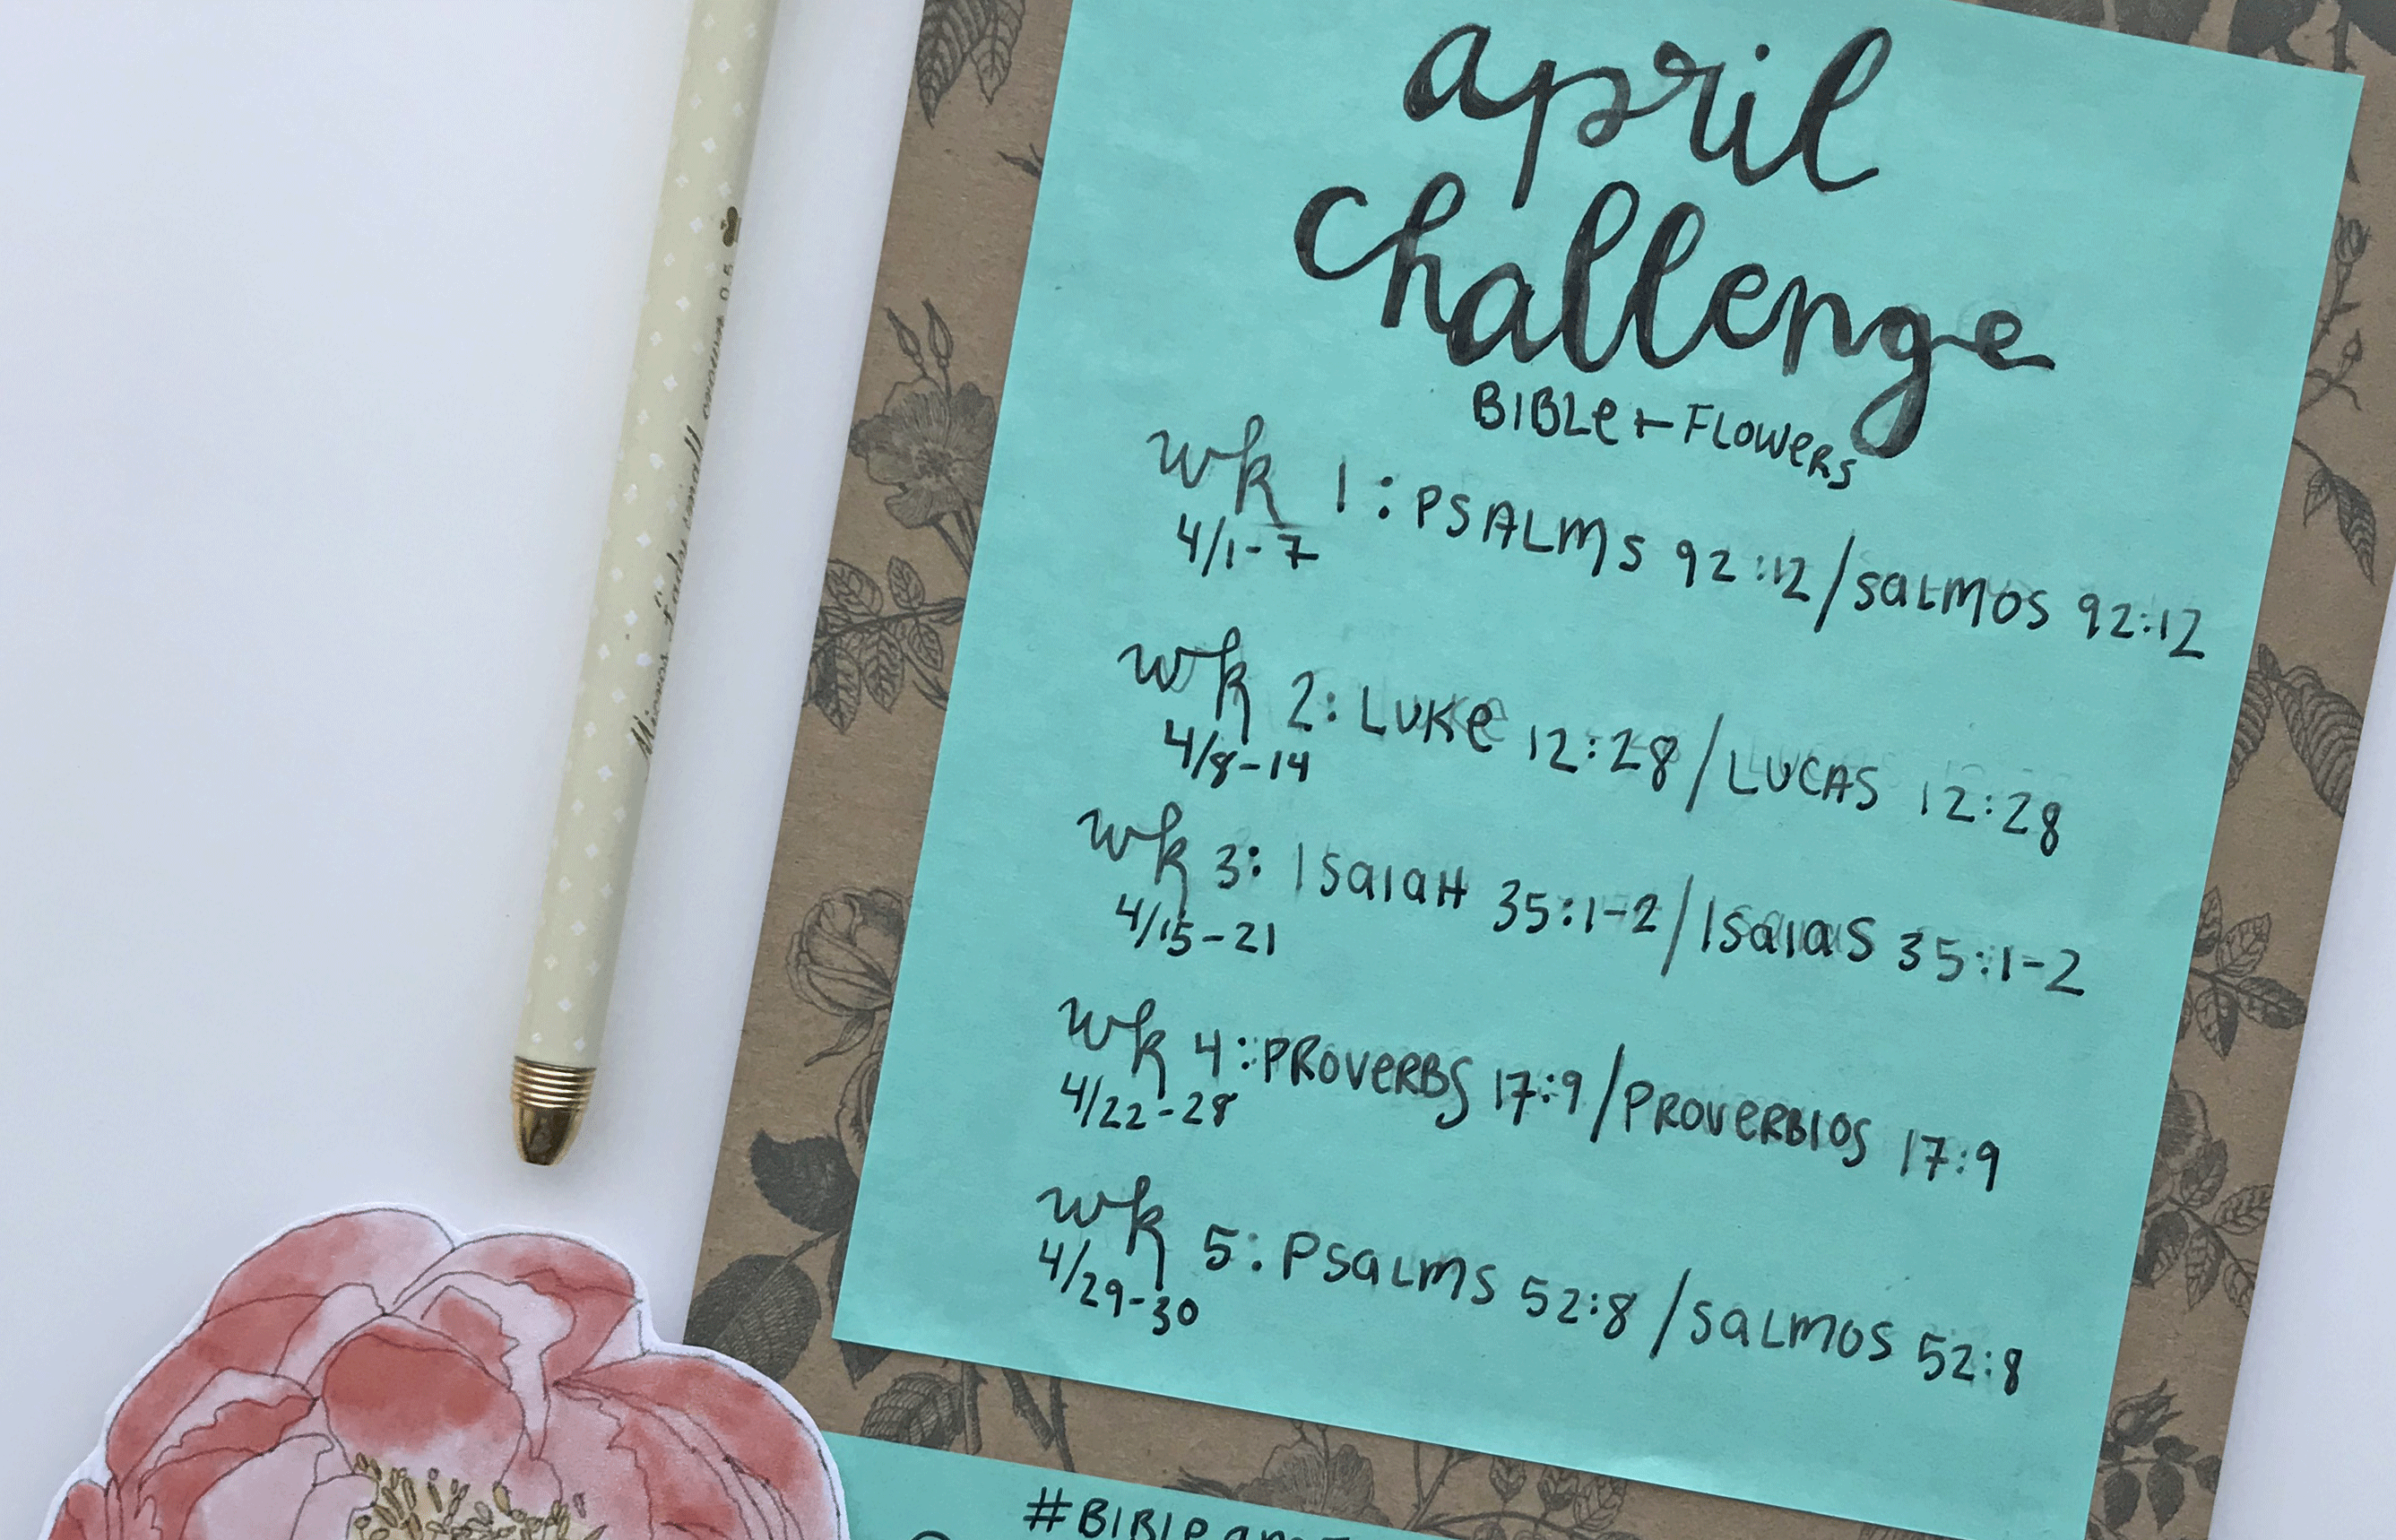 Click Here To Join The FREE Bible Journaling And Hand Lettering Challenge All About Flowers.